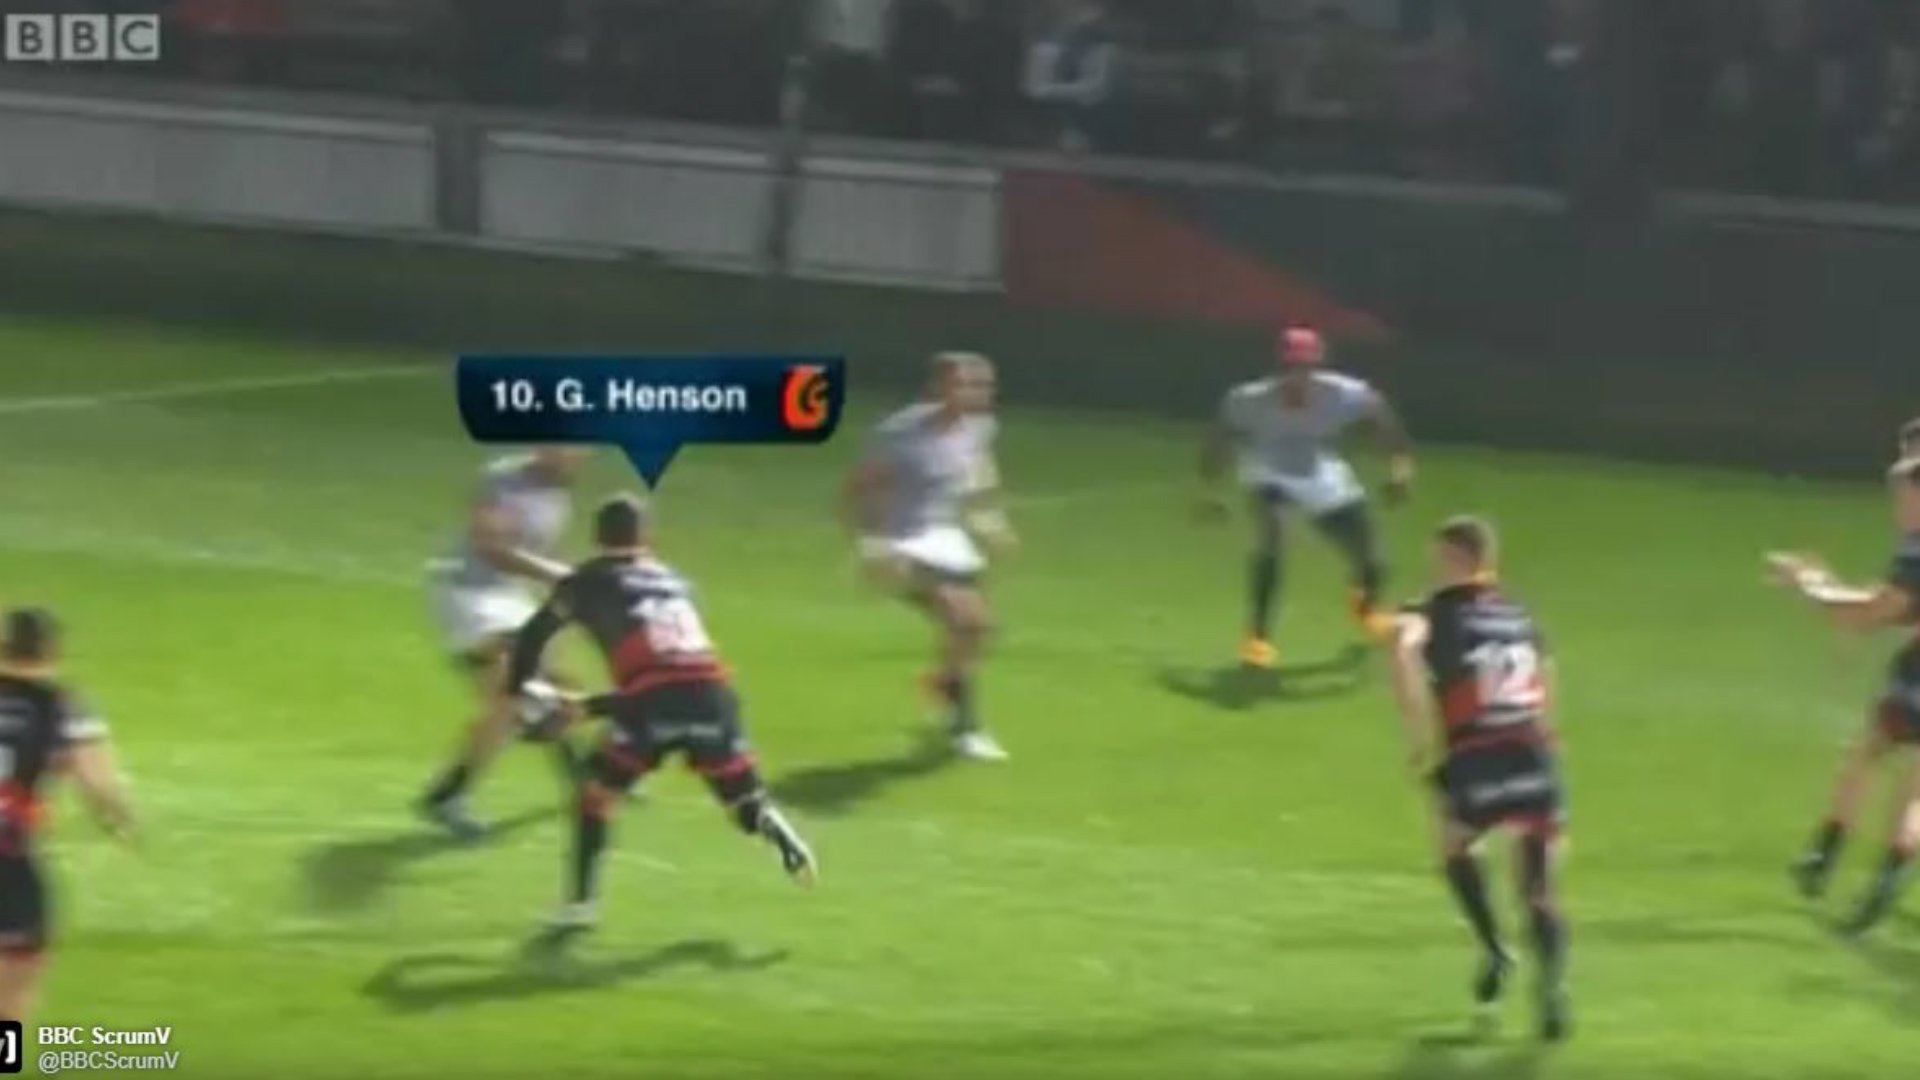 WATCH: Gavin Henson rolling back the years at Rodney Parade